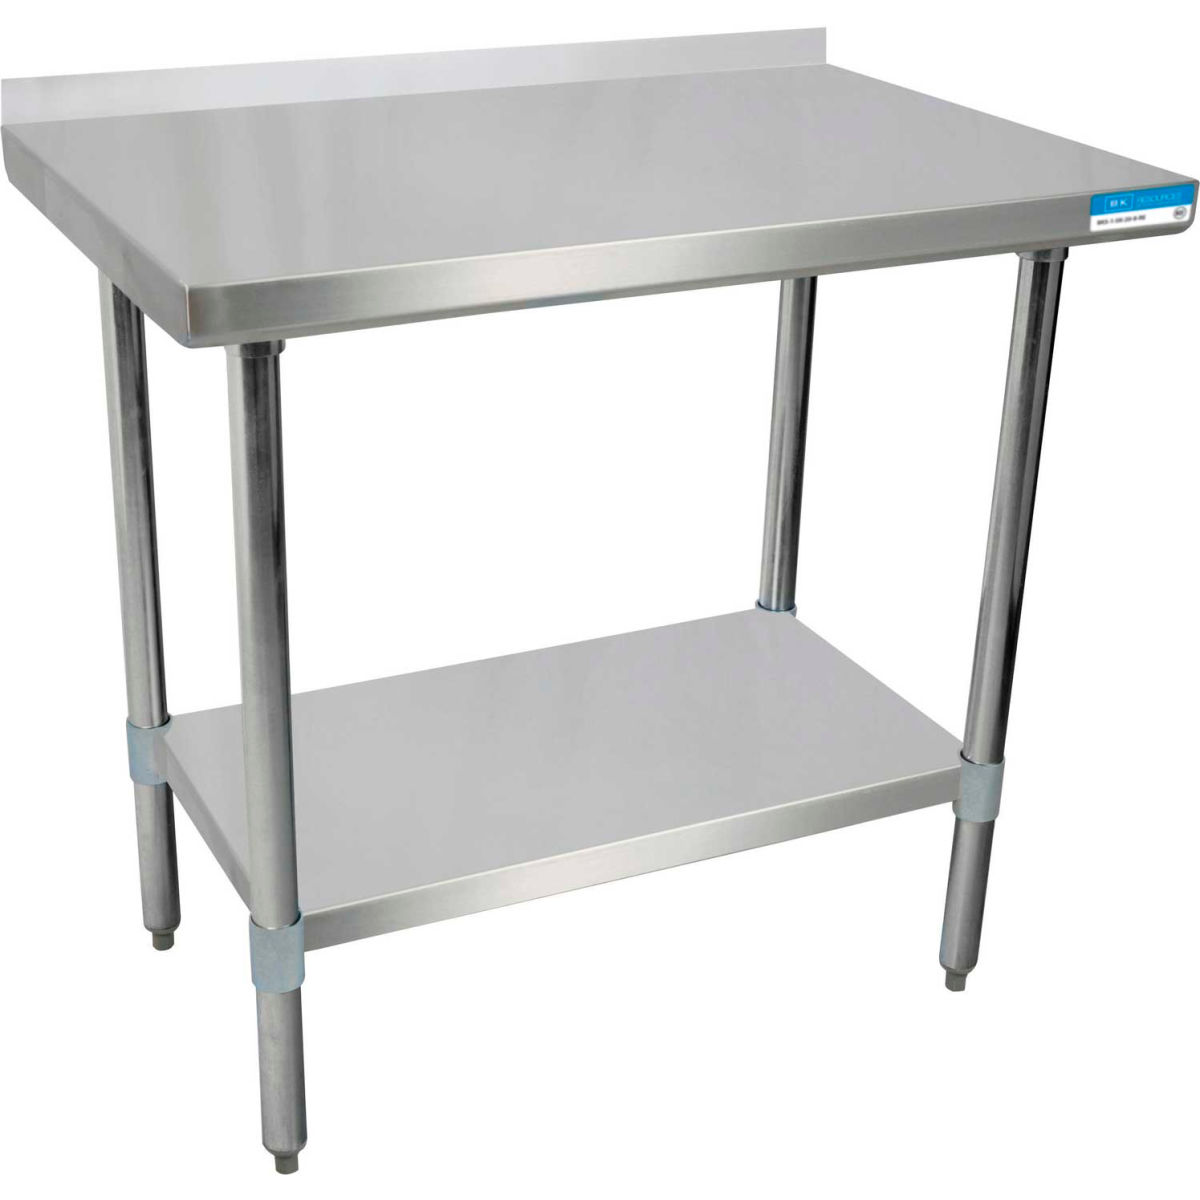 Picture of BK Resources B1516245 18 Gauge 430 Series Stainless Workbench with Undershelf & 1.5 in. Backsplash - 72 x 18 in.